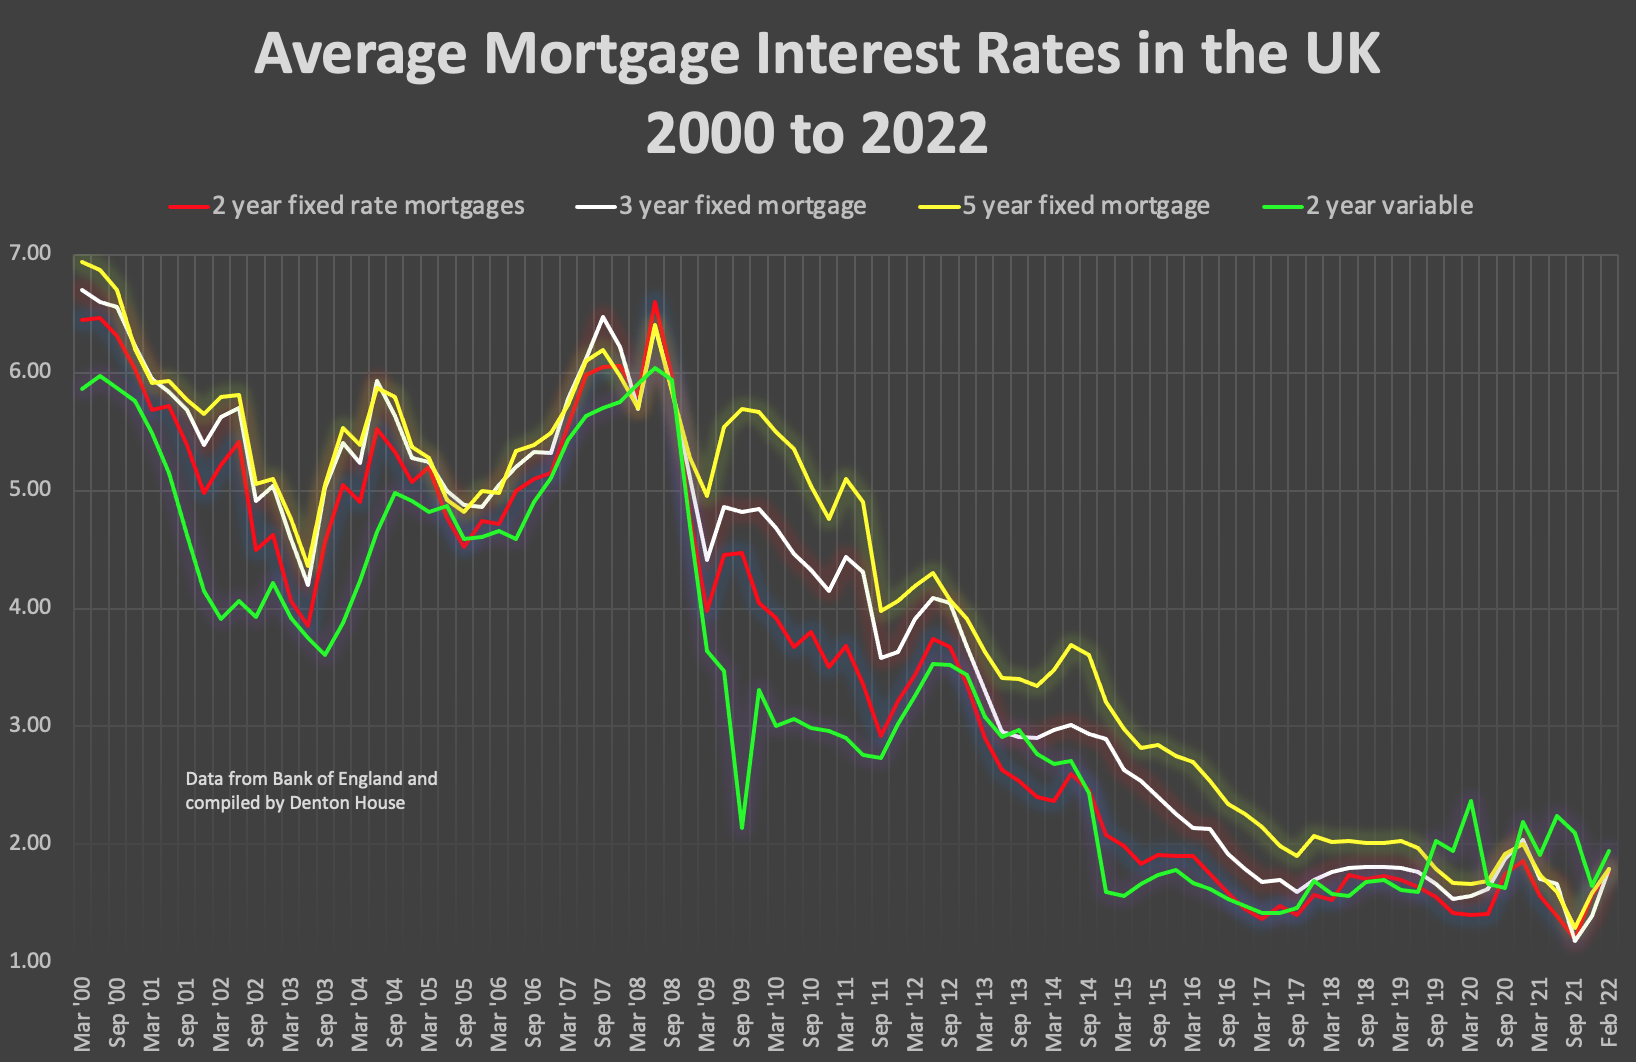 Average Mortgage Interest Rates in the UK 2000 to 2022